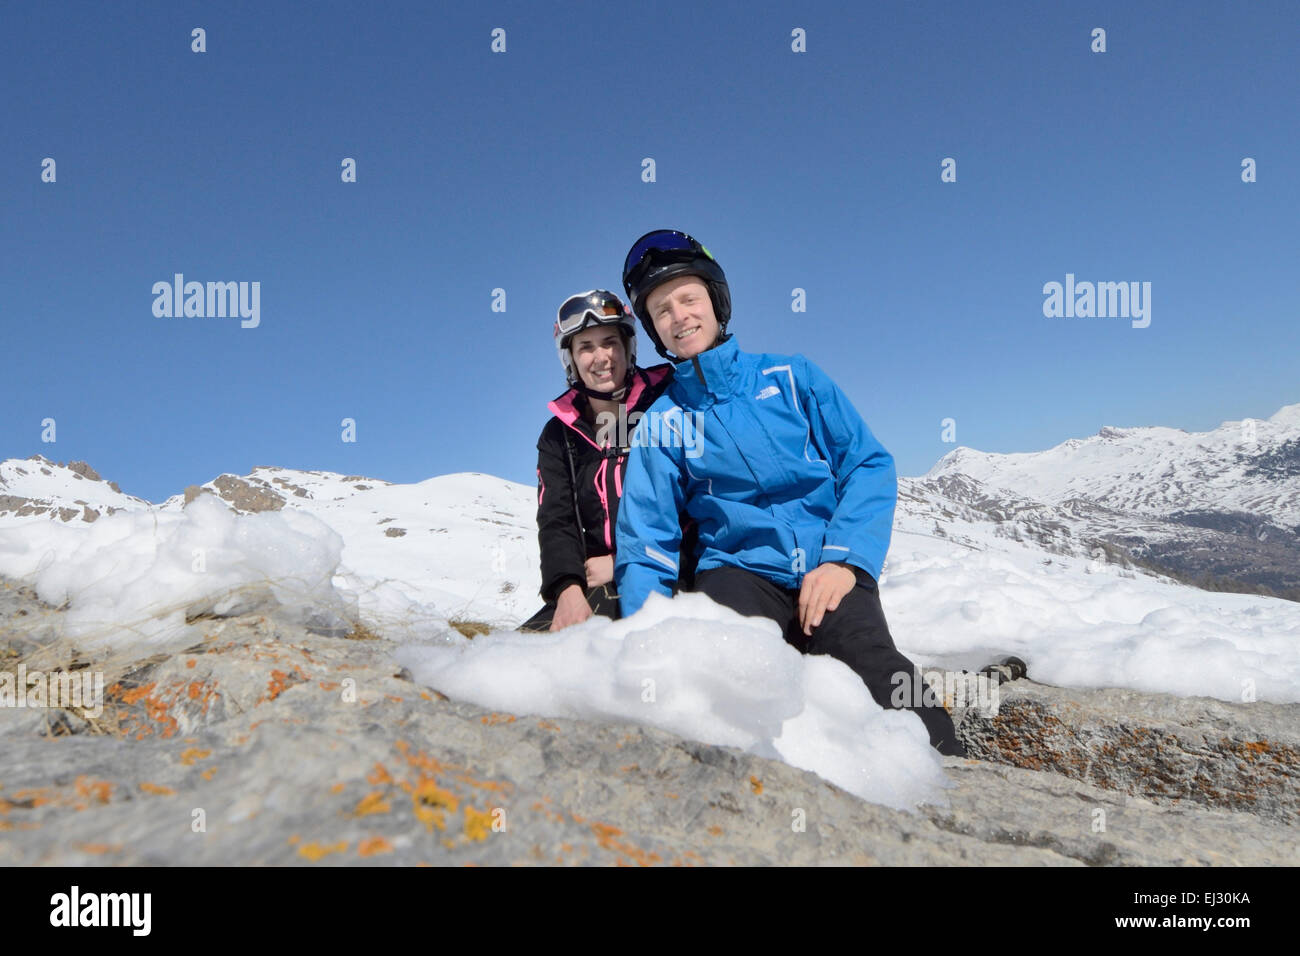 Skiers posing for photo in warm sunny conditions  Stock Photo